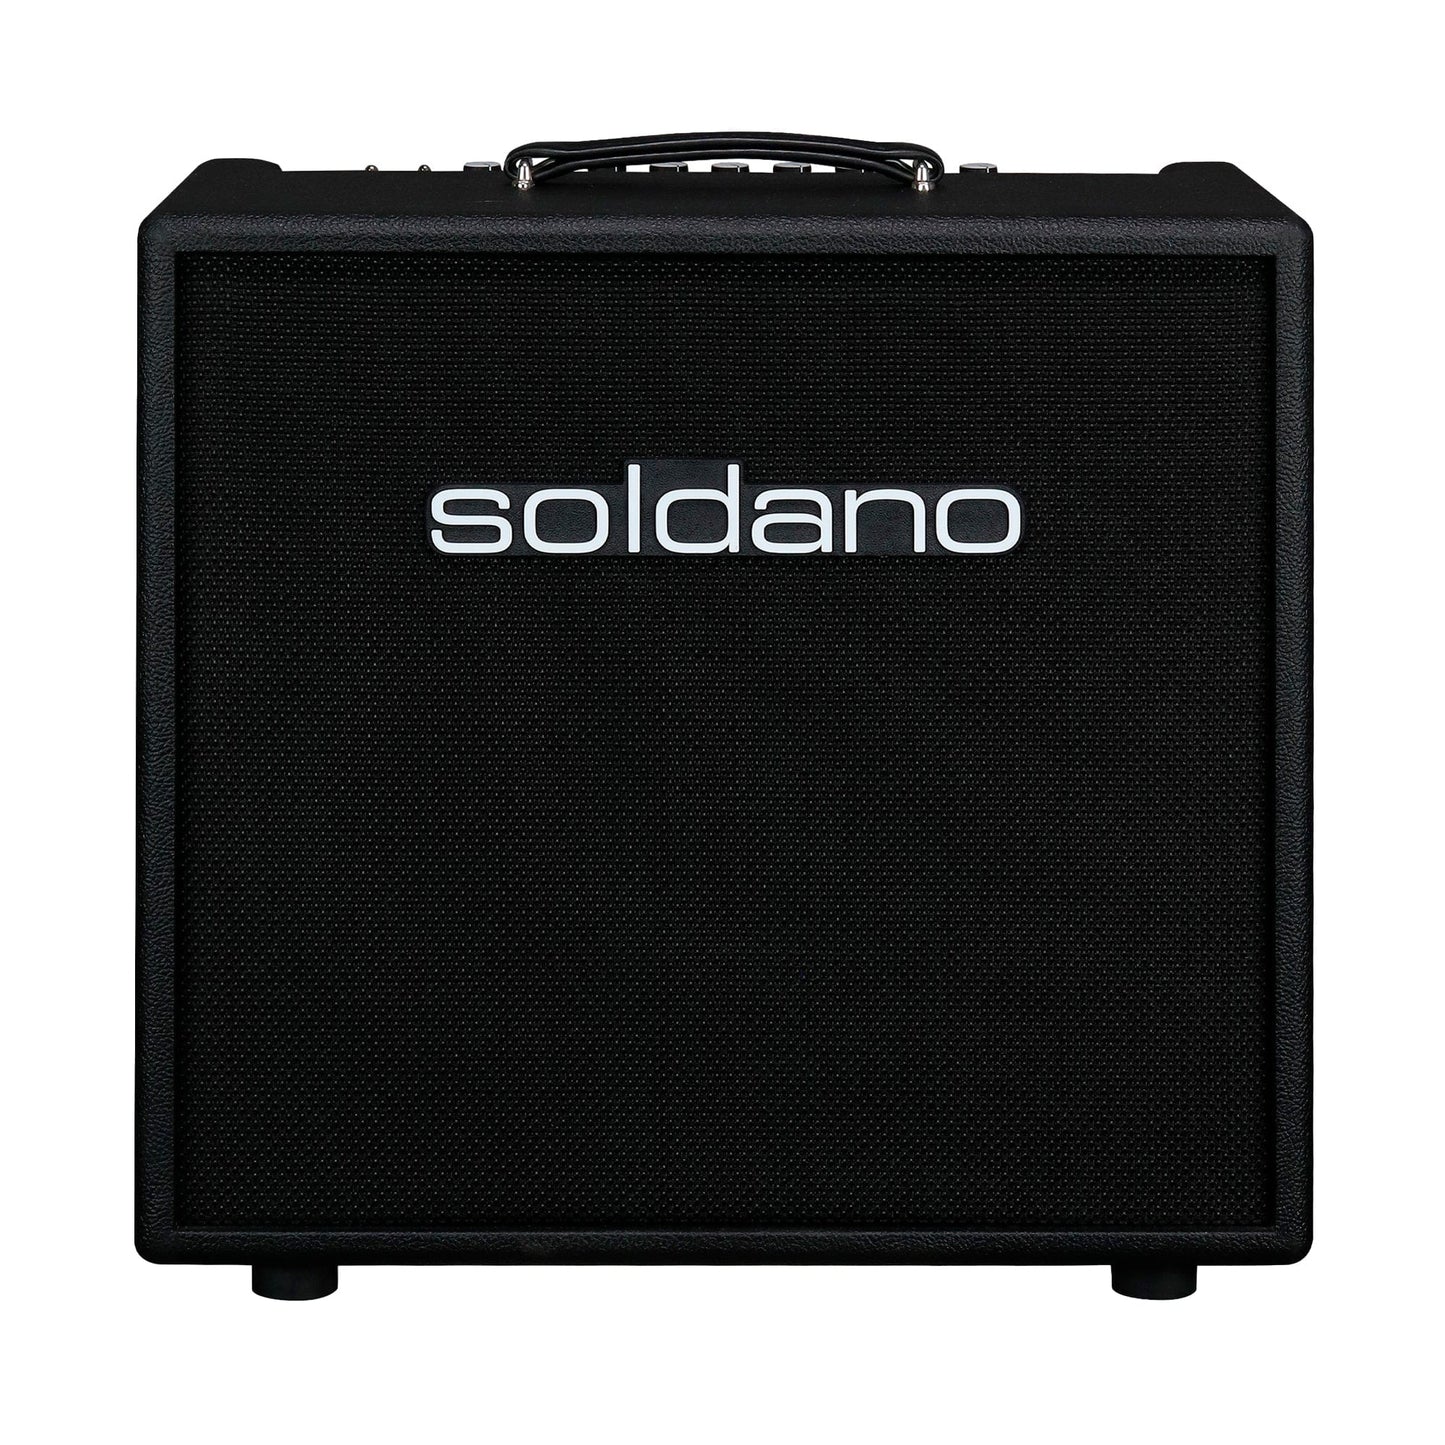 Soldano Super Lead Overdrive 1x12 30w All Tube Combo Amp Black Amps / Guitar Combos